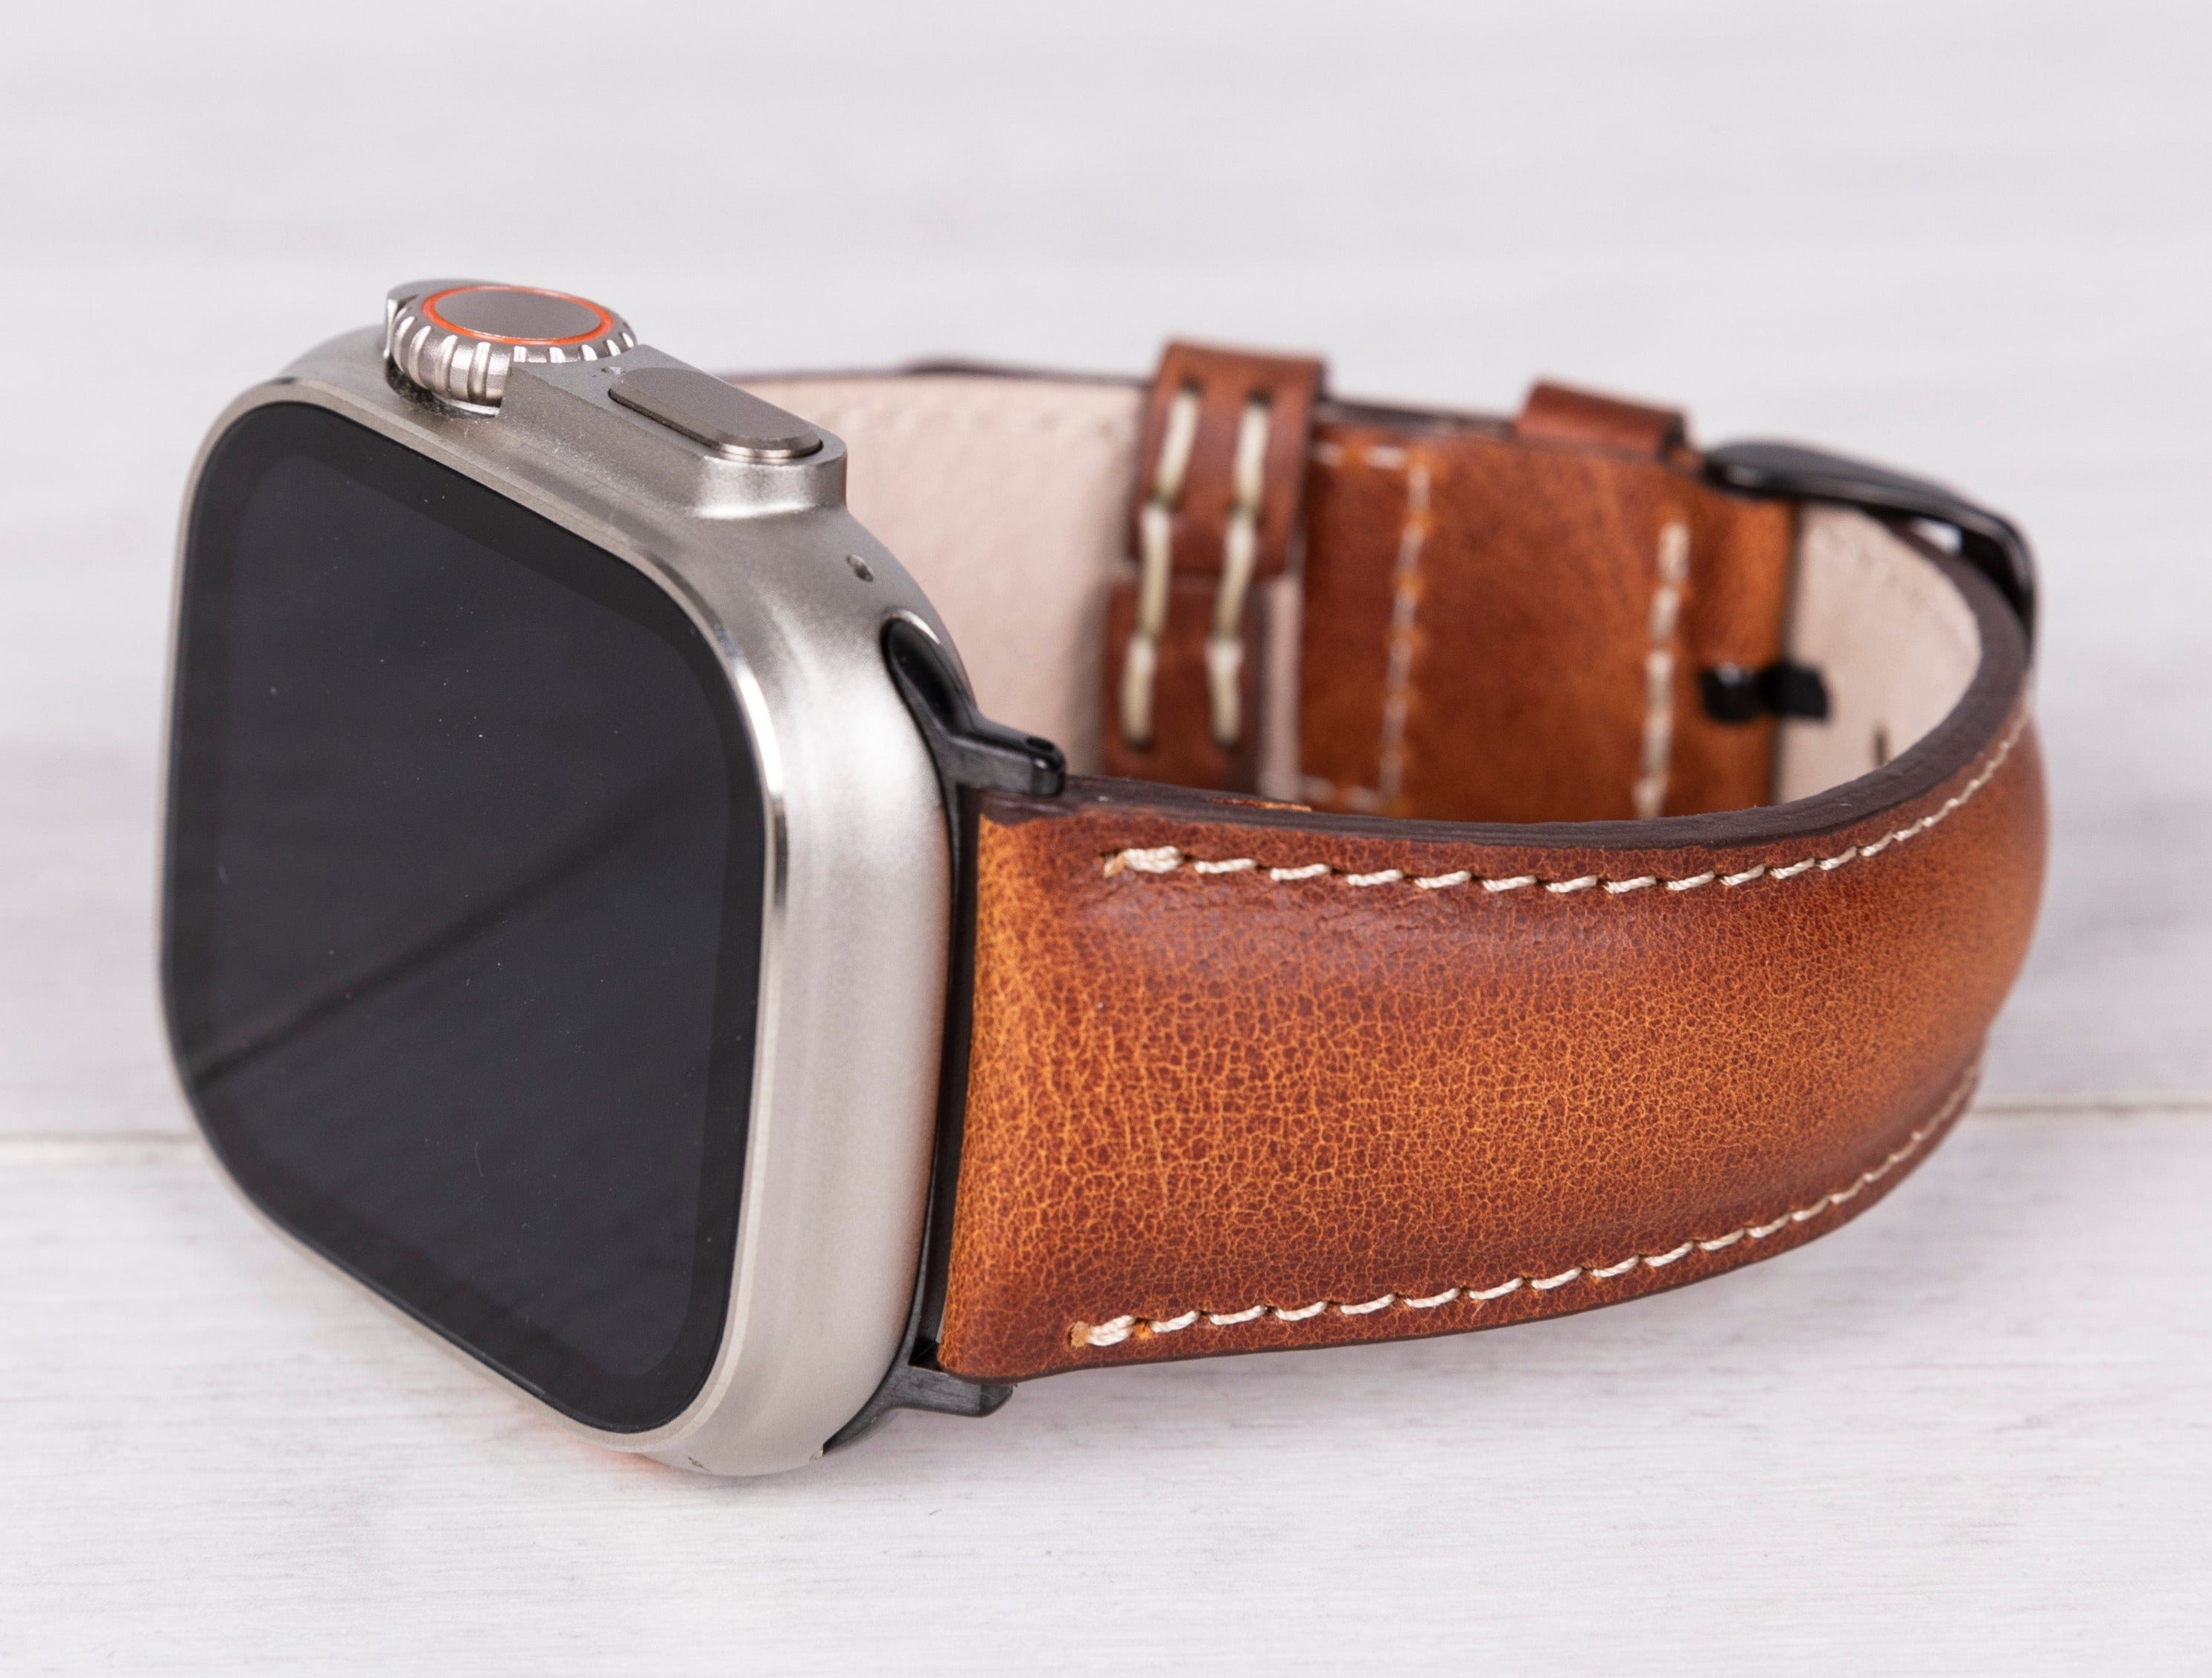 o2leather Genuine Leather Apple Watch Band